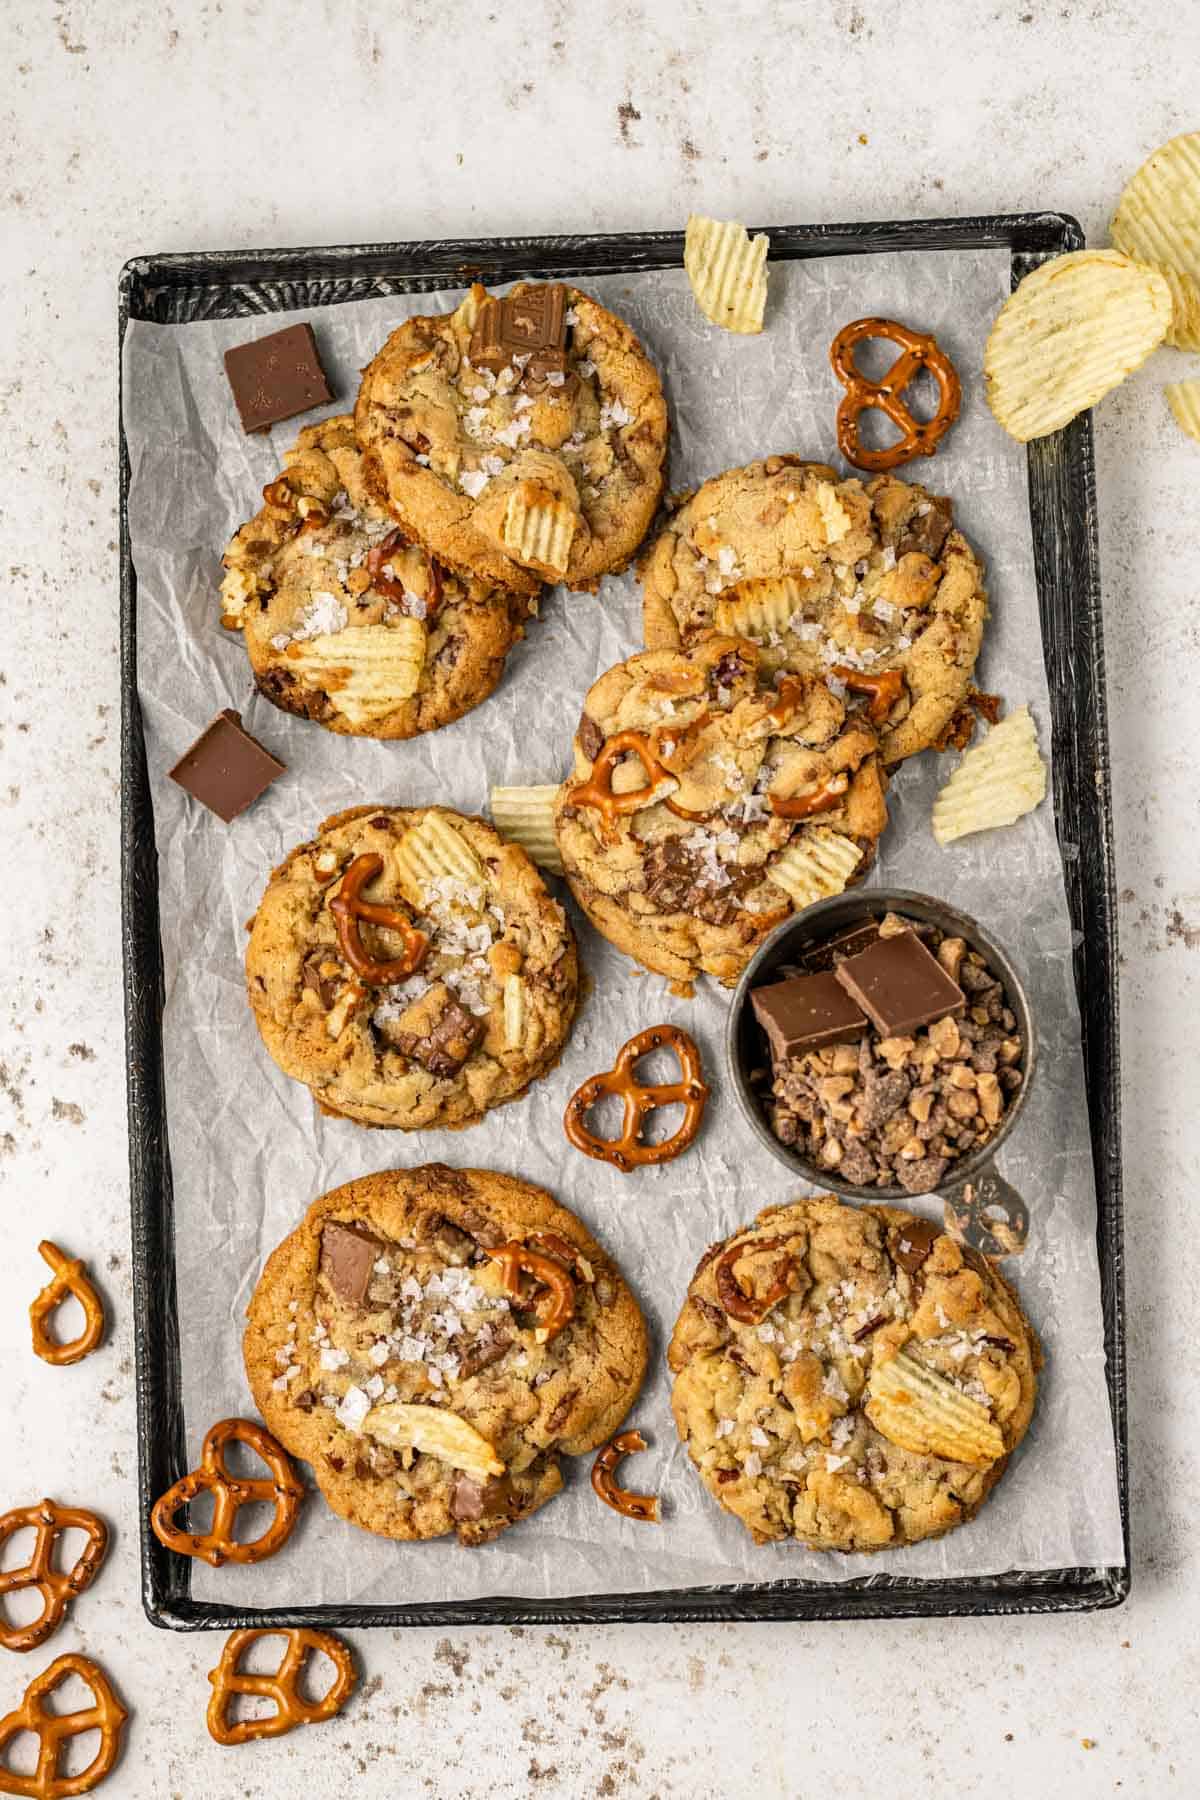 a sheet pan lined with parchment paper with kitchen sink cookies arranged on top surrounded by potato chips, pretzels, chunks of chocolate, and a small black dish of toffee bits